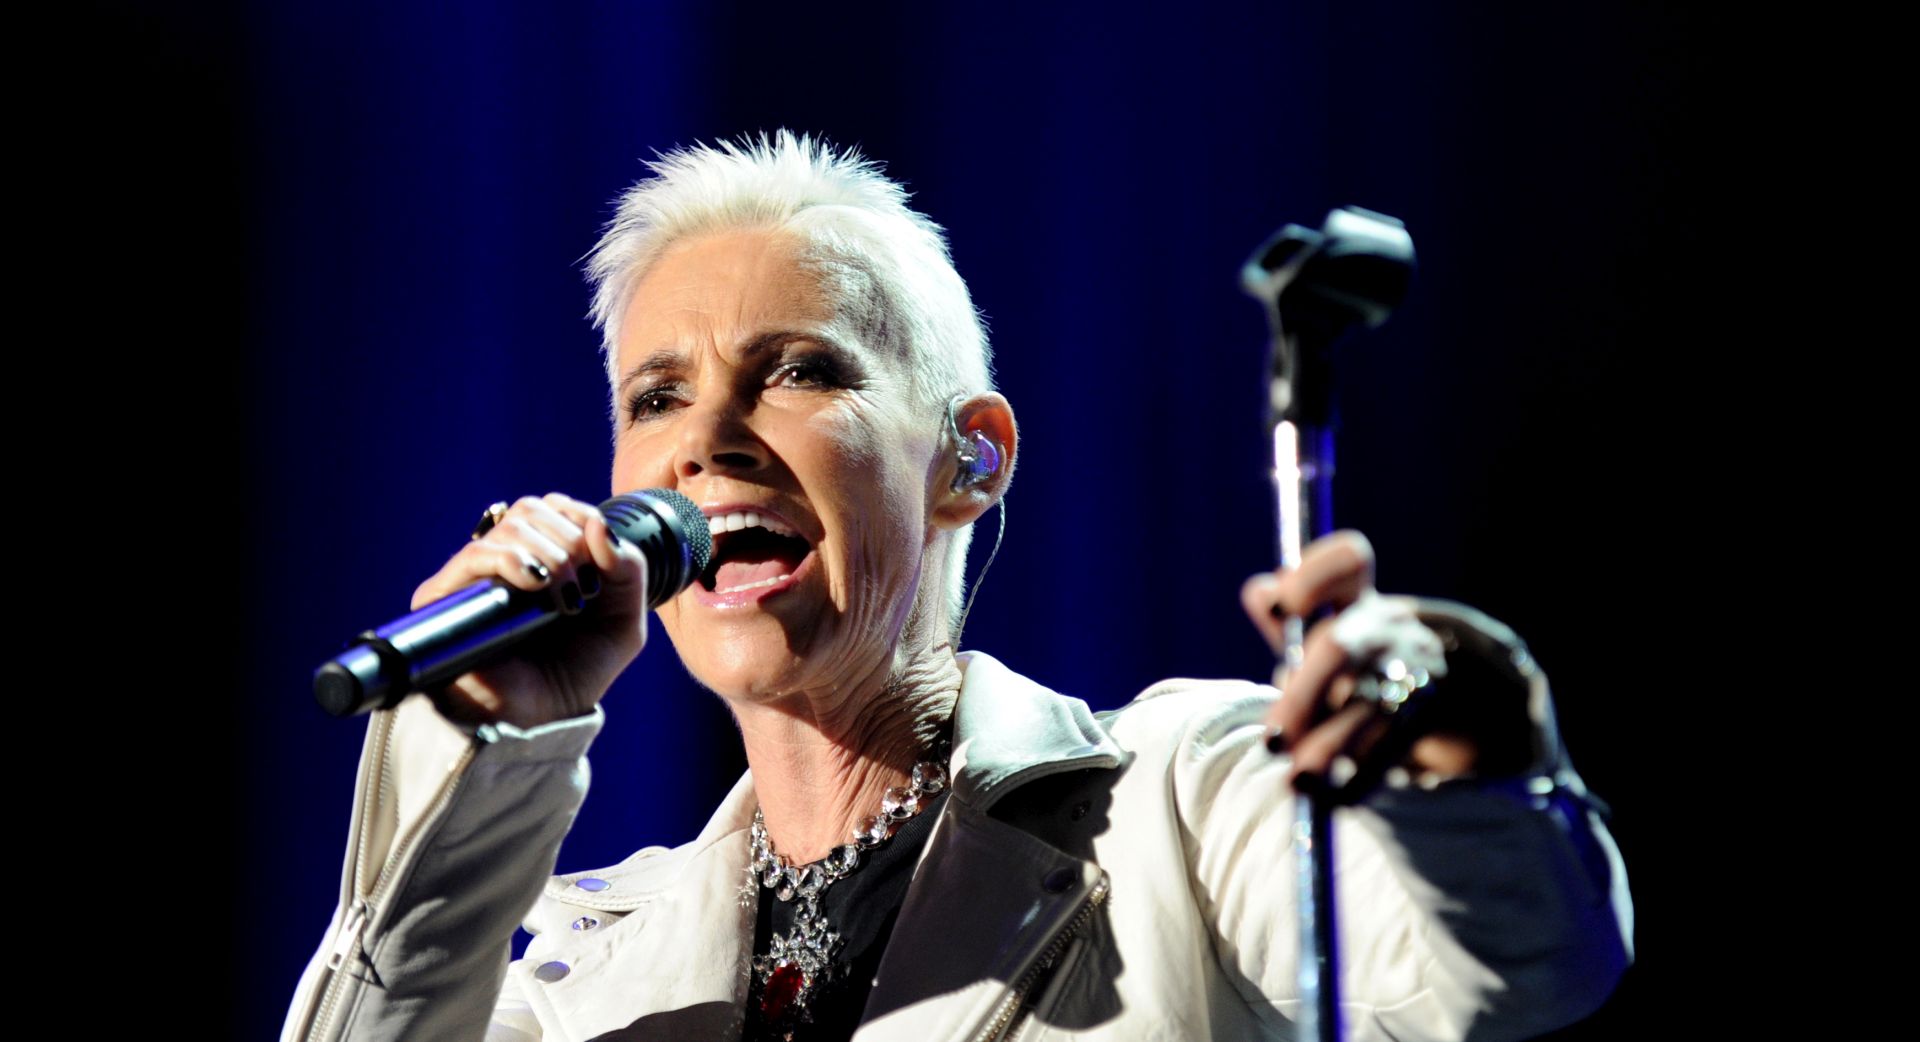 epa08059485 (FILE) - Swedish singer Marie Fredriksson of Swedish pop duo Roxette performs during their Charm School tour in Sydney, Australia, 16 February 2012 (reissued 10 December 2019). Marie Fredriksson died on 09 December 2019 at the age of 61 after a long illness, her family confirmed on 10 December 2019.  EPA/TRACEY NEARMY AUSTRALIA AND NEW ZEALAND OUT *** Local Caption *** 50219653